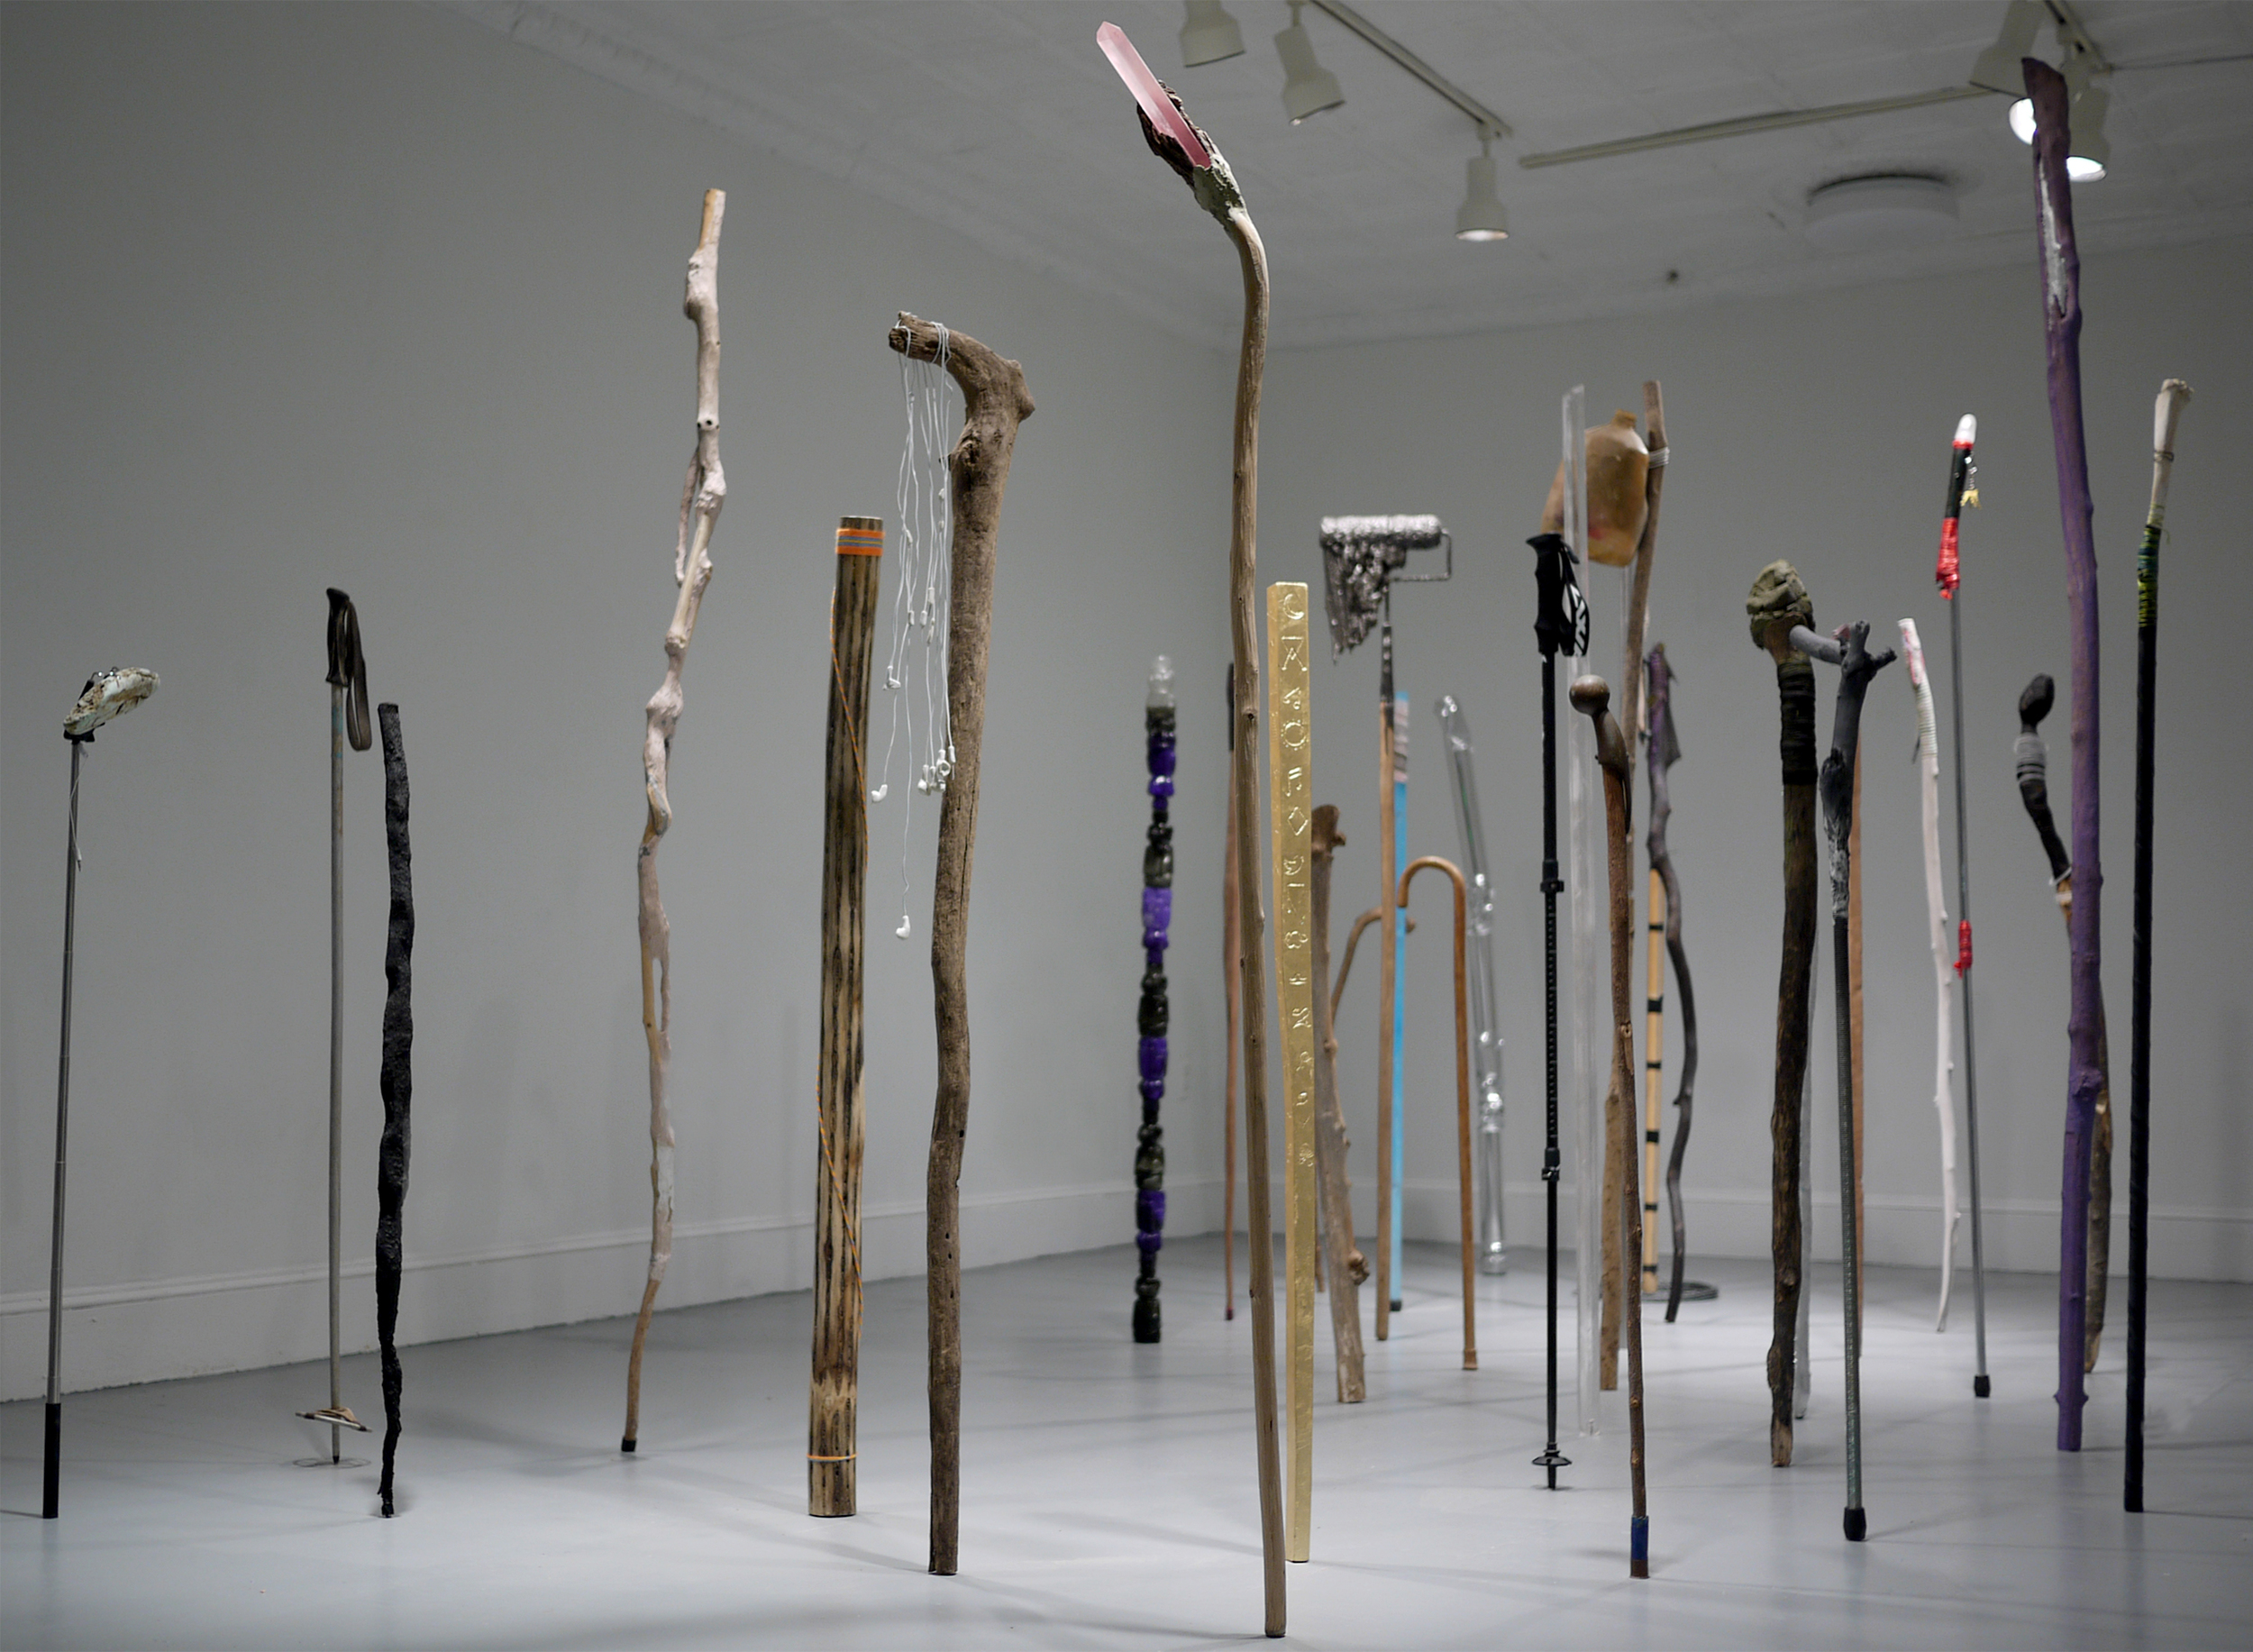  Drifter History, 2015, dimensions variable, found and fabricated walking sticks 